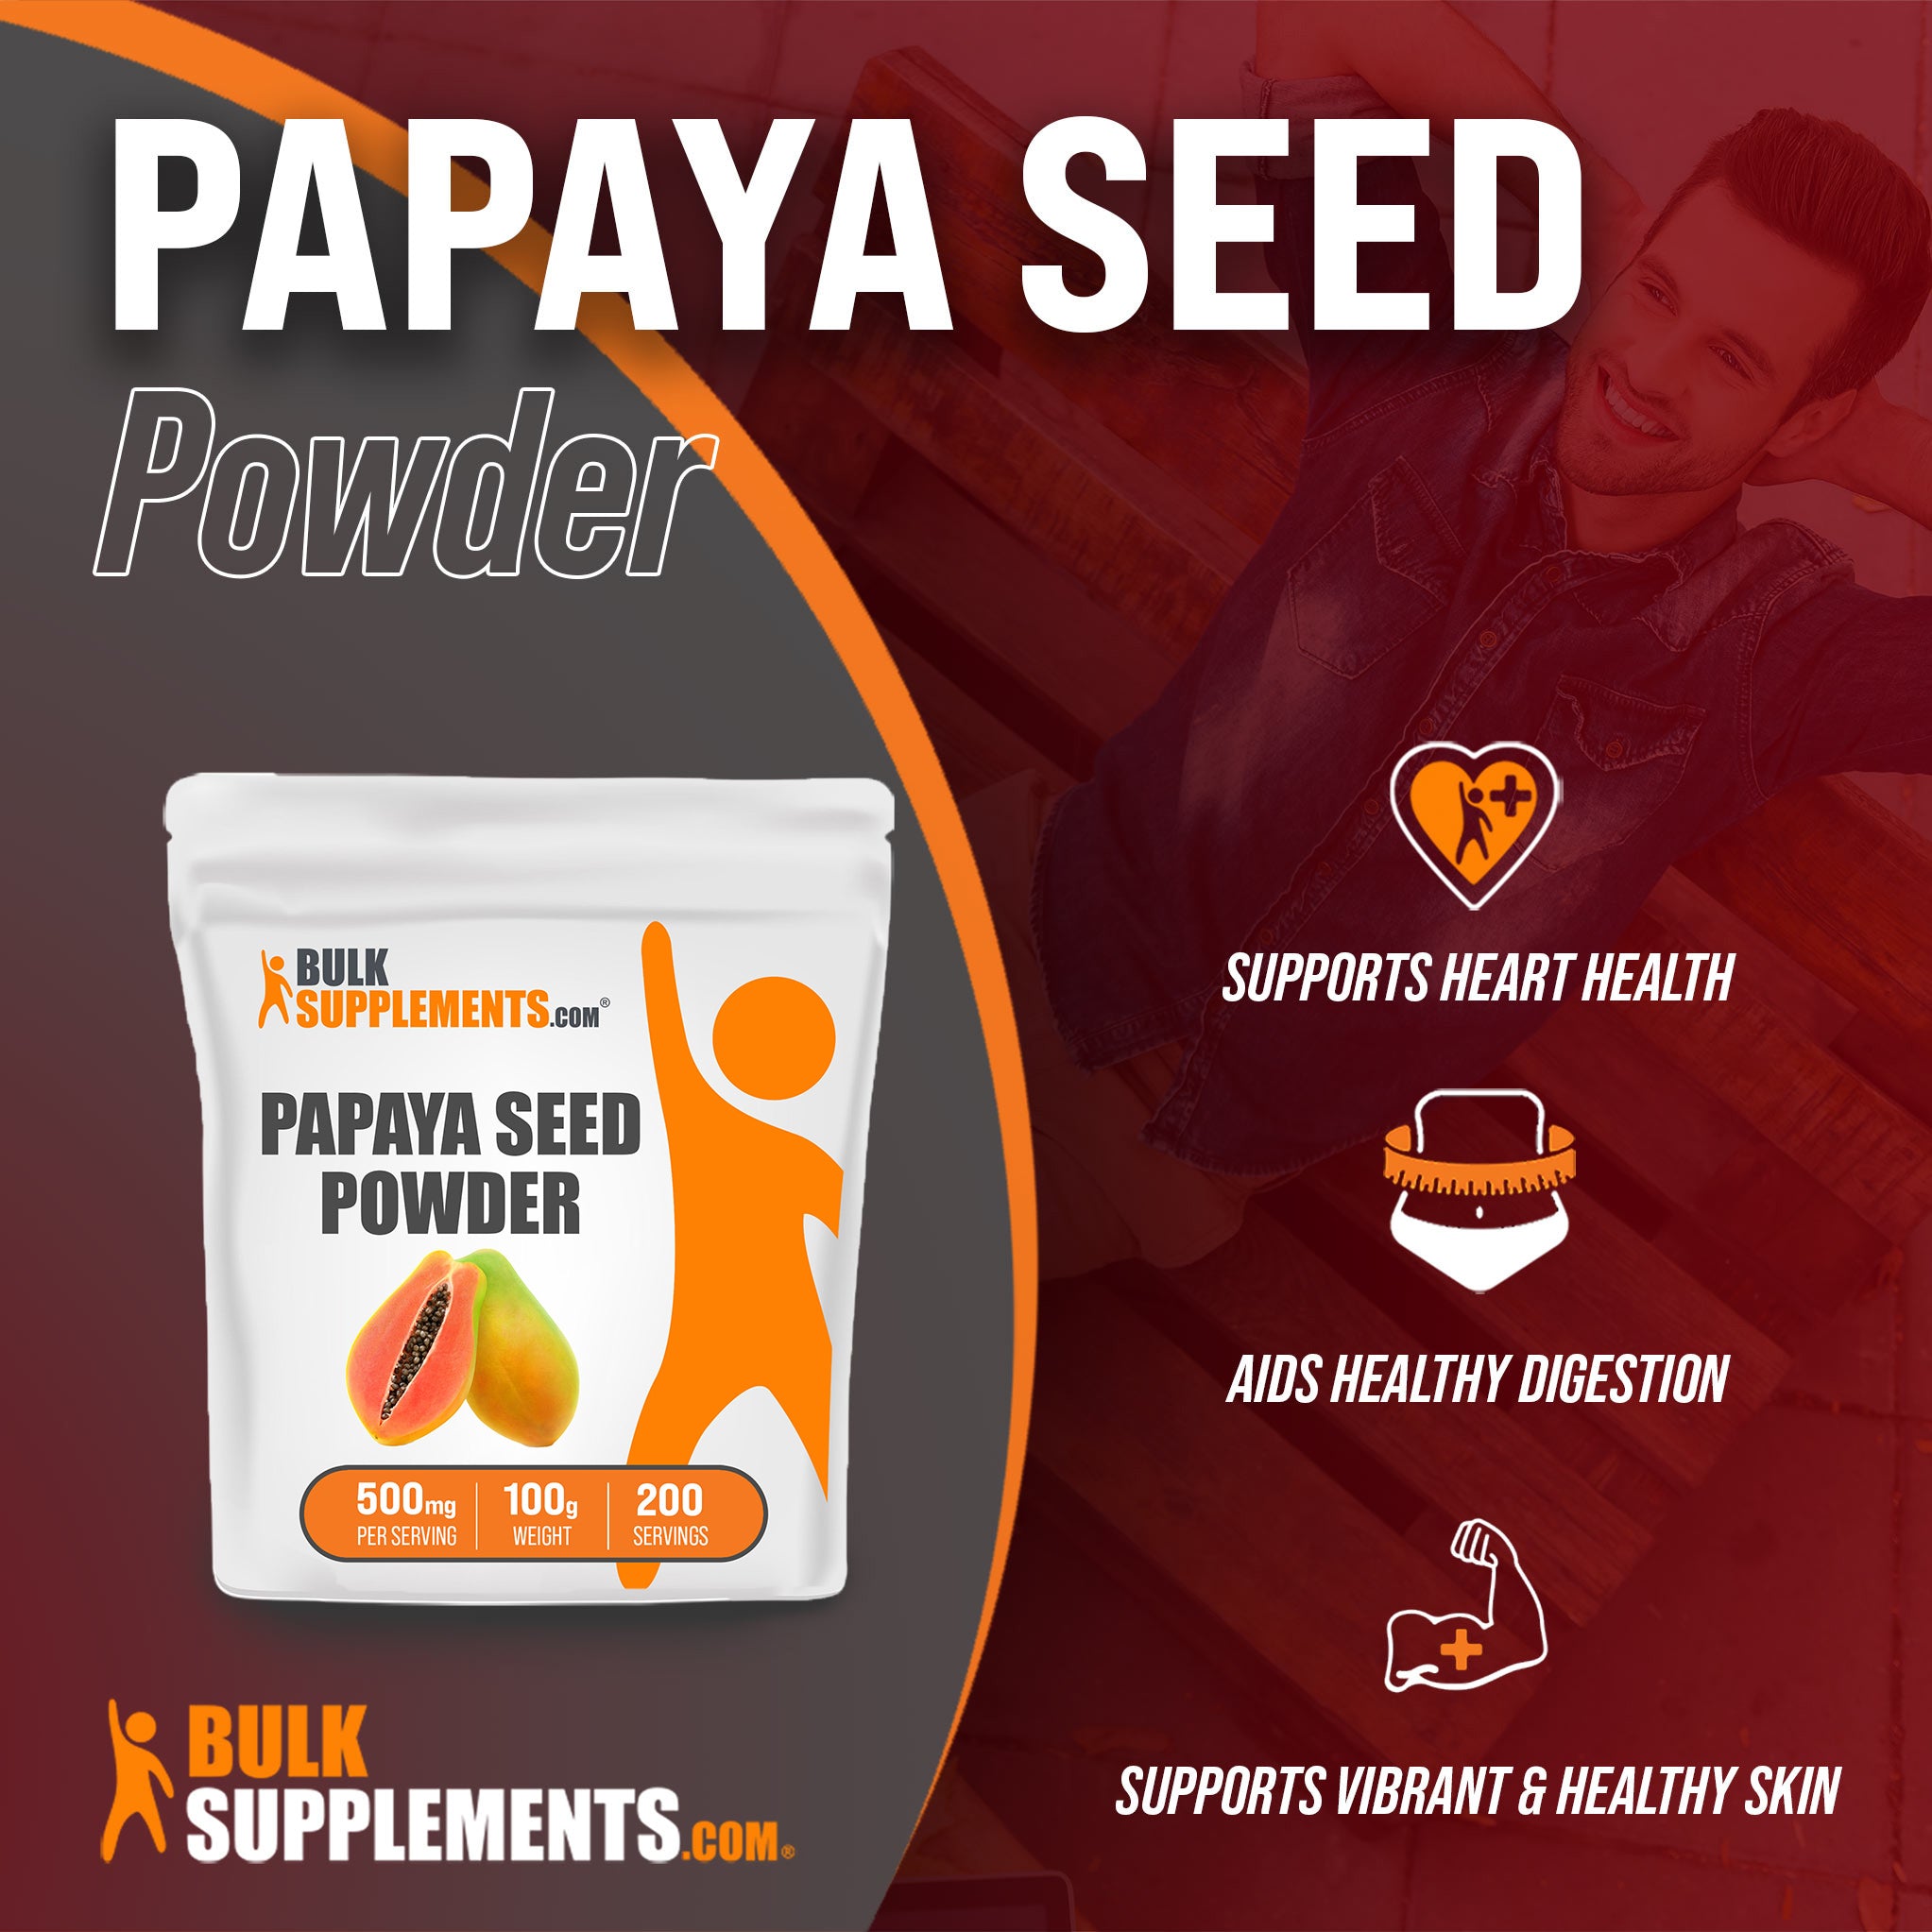 Benefits of Papaya Seed Powder: supports heart health, aids healthy digestion, supports vibrant and healthy skin